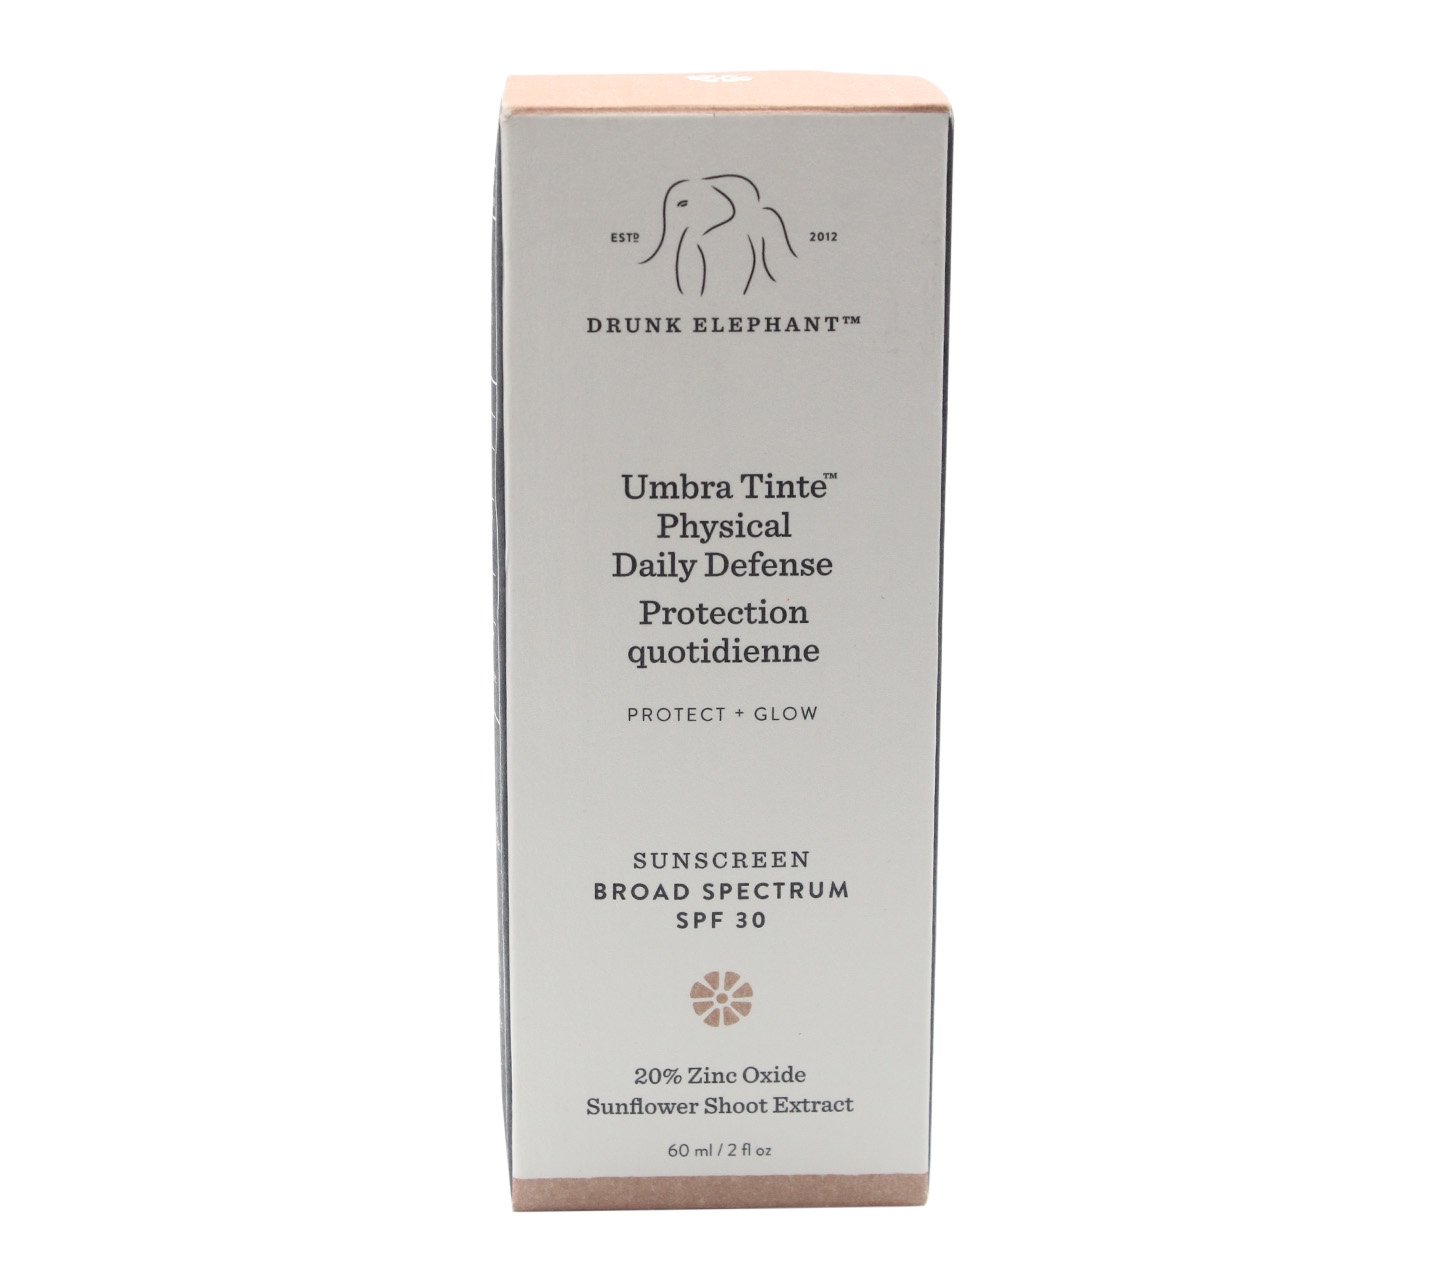 Drunk Elephant Umbra Tinte Physical Daily Defence Protection SPF 30 Faces